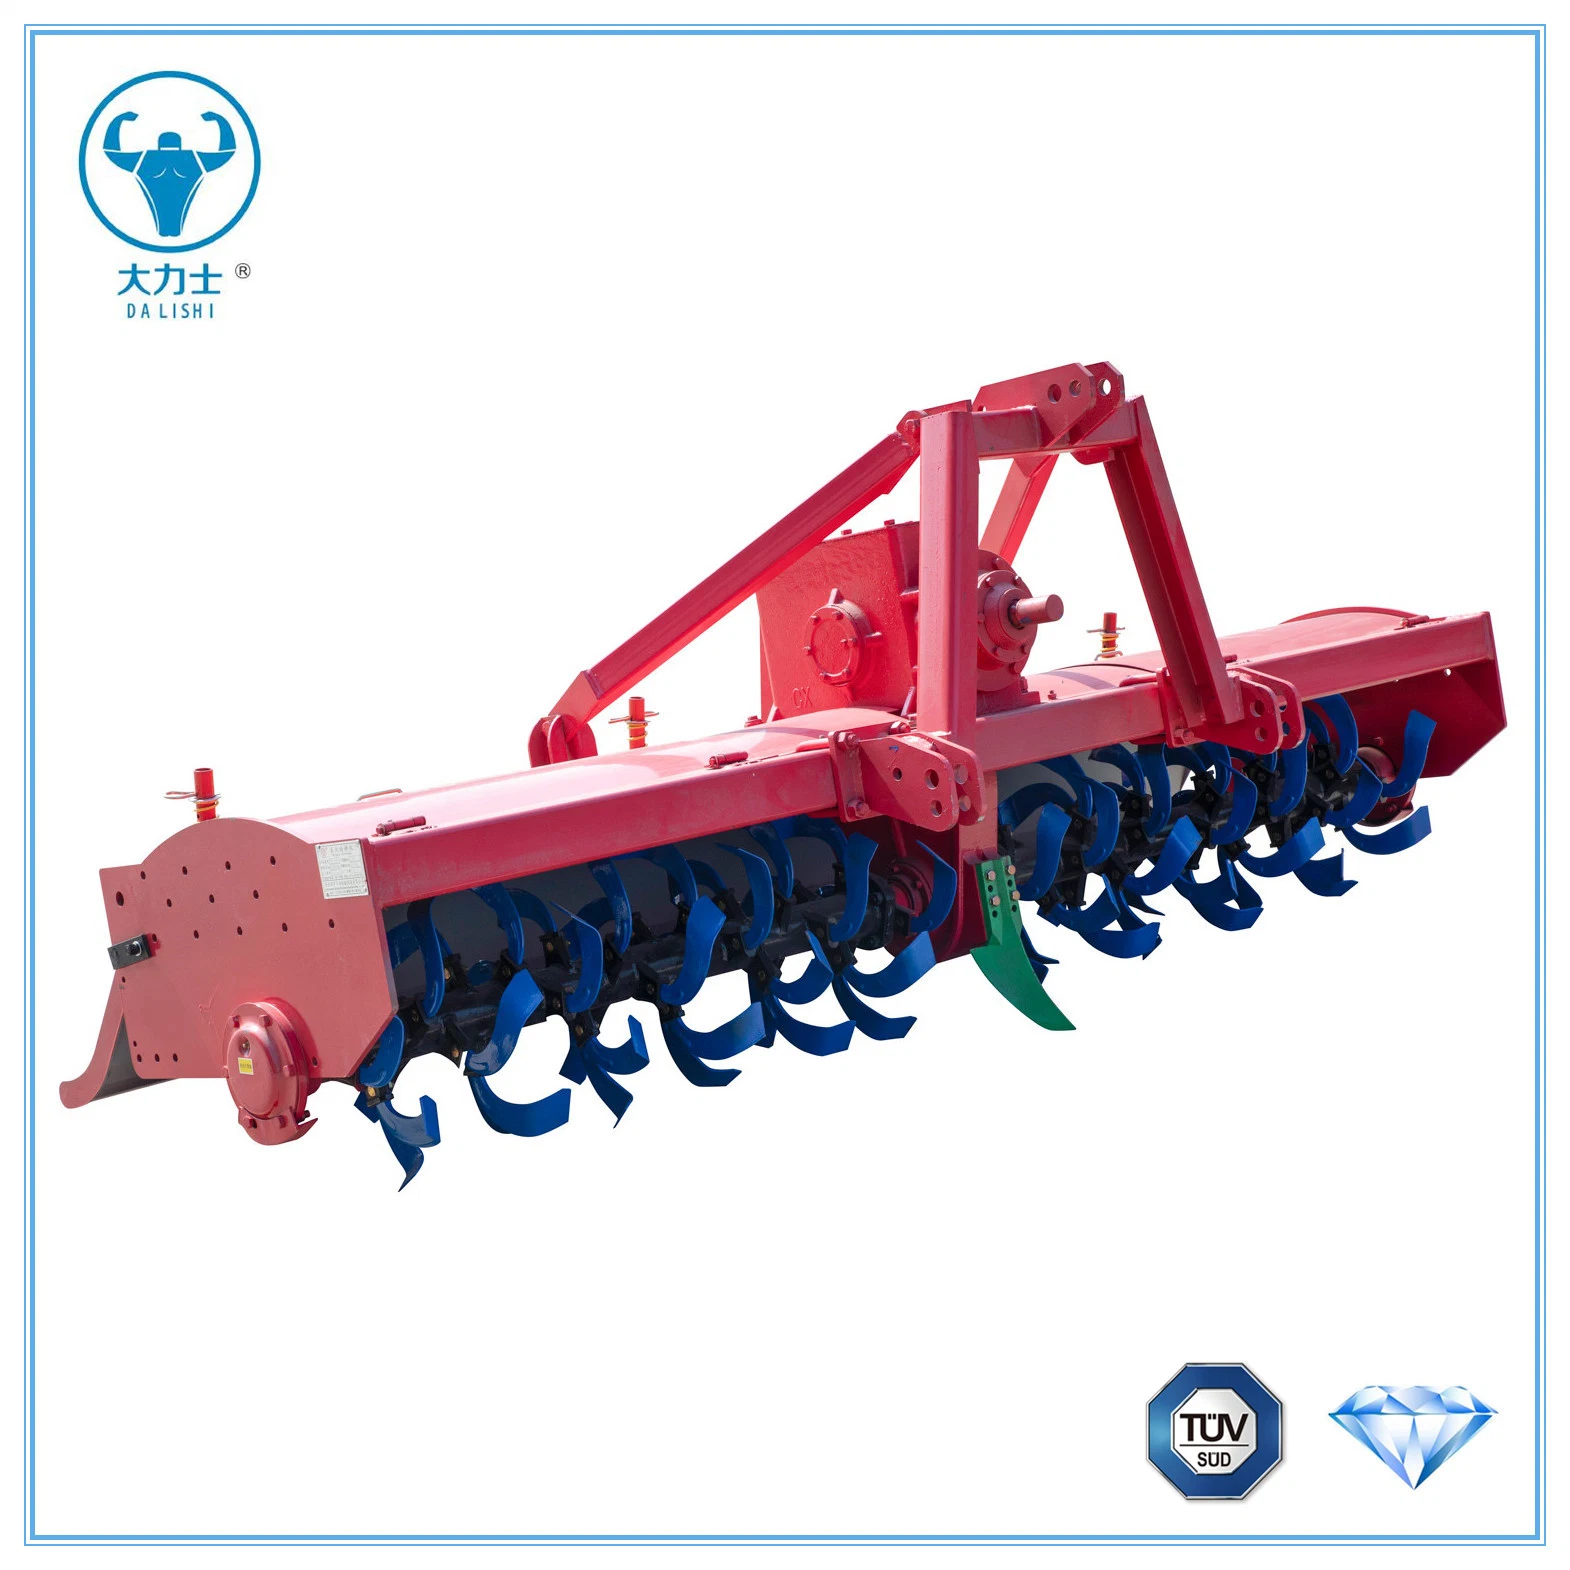 Rotary Tiller with Super Crushing Capacity.